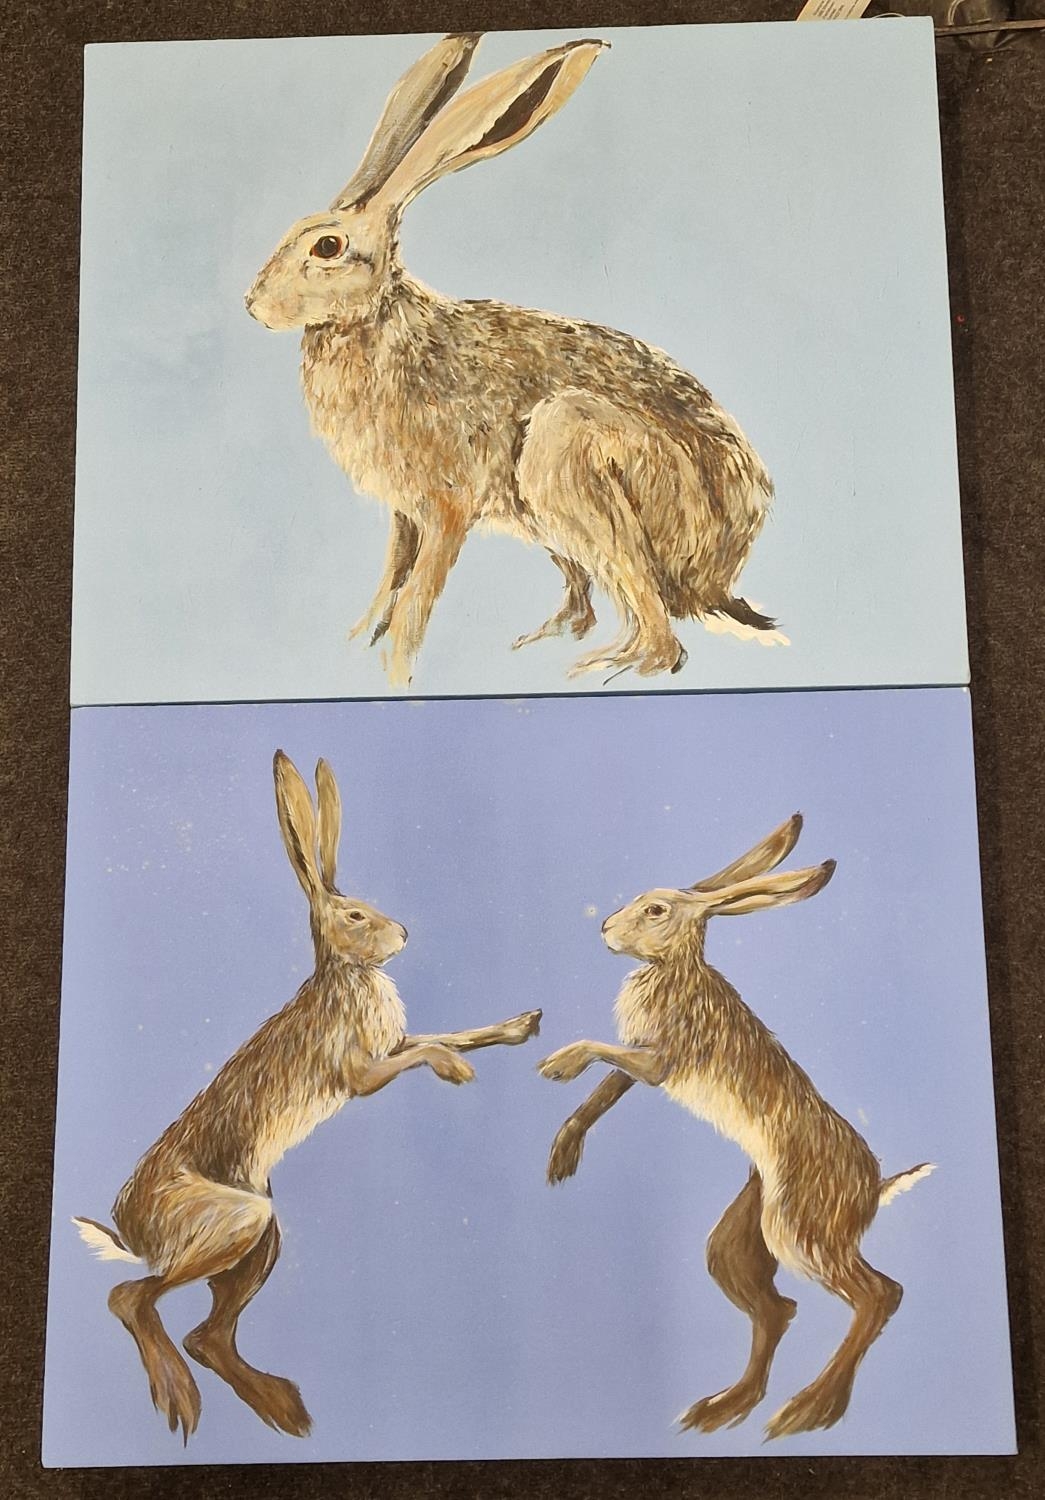 Krysyna Evans: Local artist two contemporary oil on canvas paintings of hares "Dancing Hares" and "